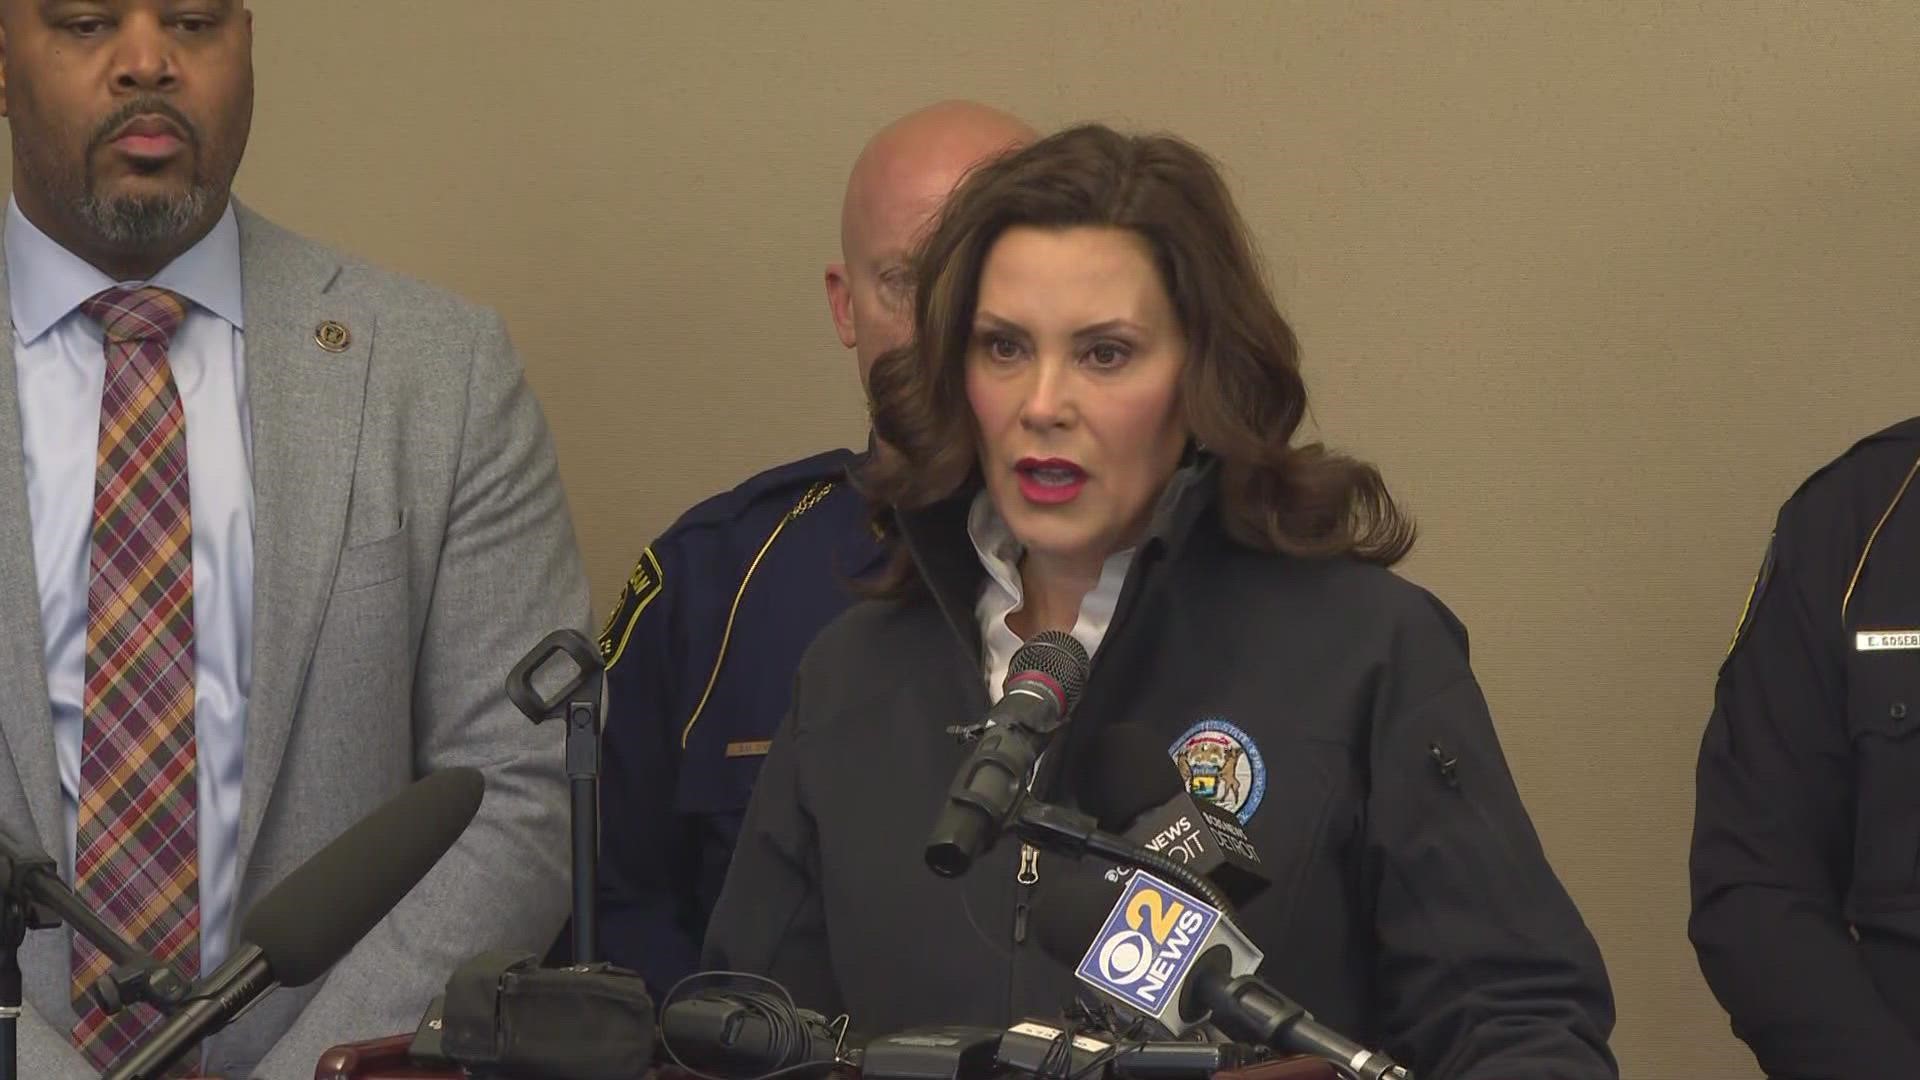 Michigan Gov. Gretchen Whitmer, Congresswoman Elissa Slotkin, East Lansing Mayor Ron Bacon and Lansing Mayor Andy Schor said the community is grieving.